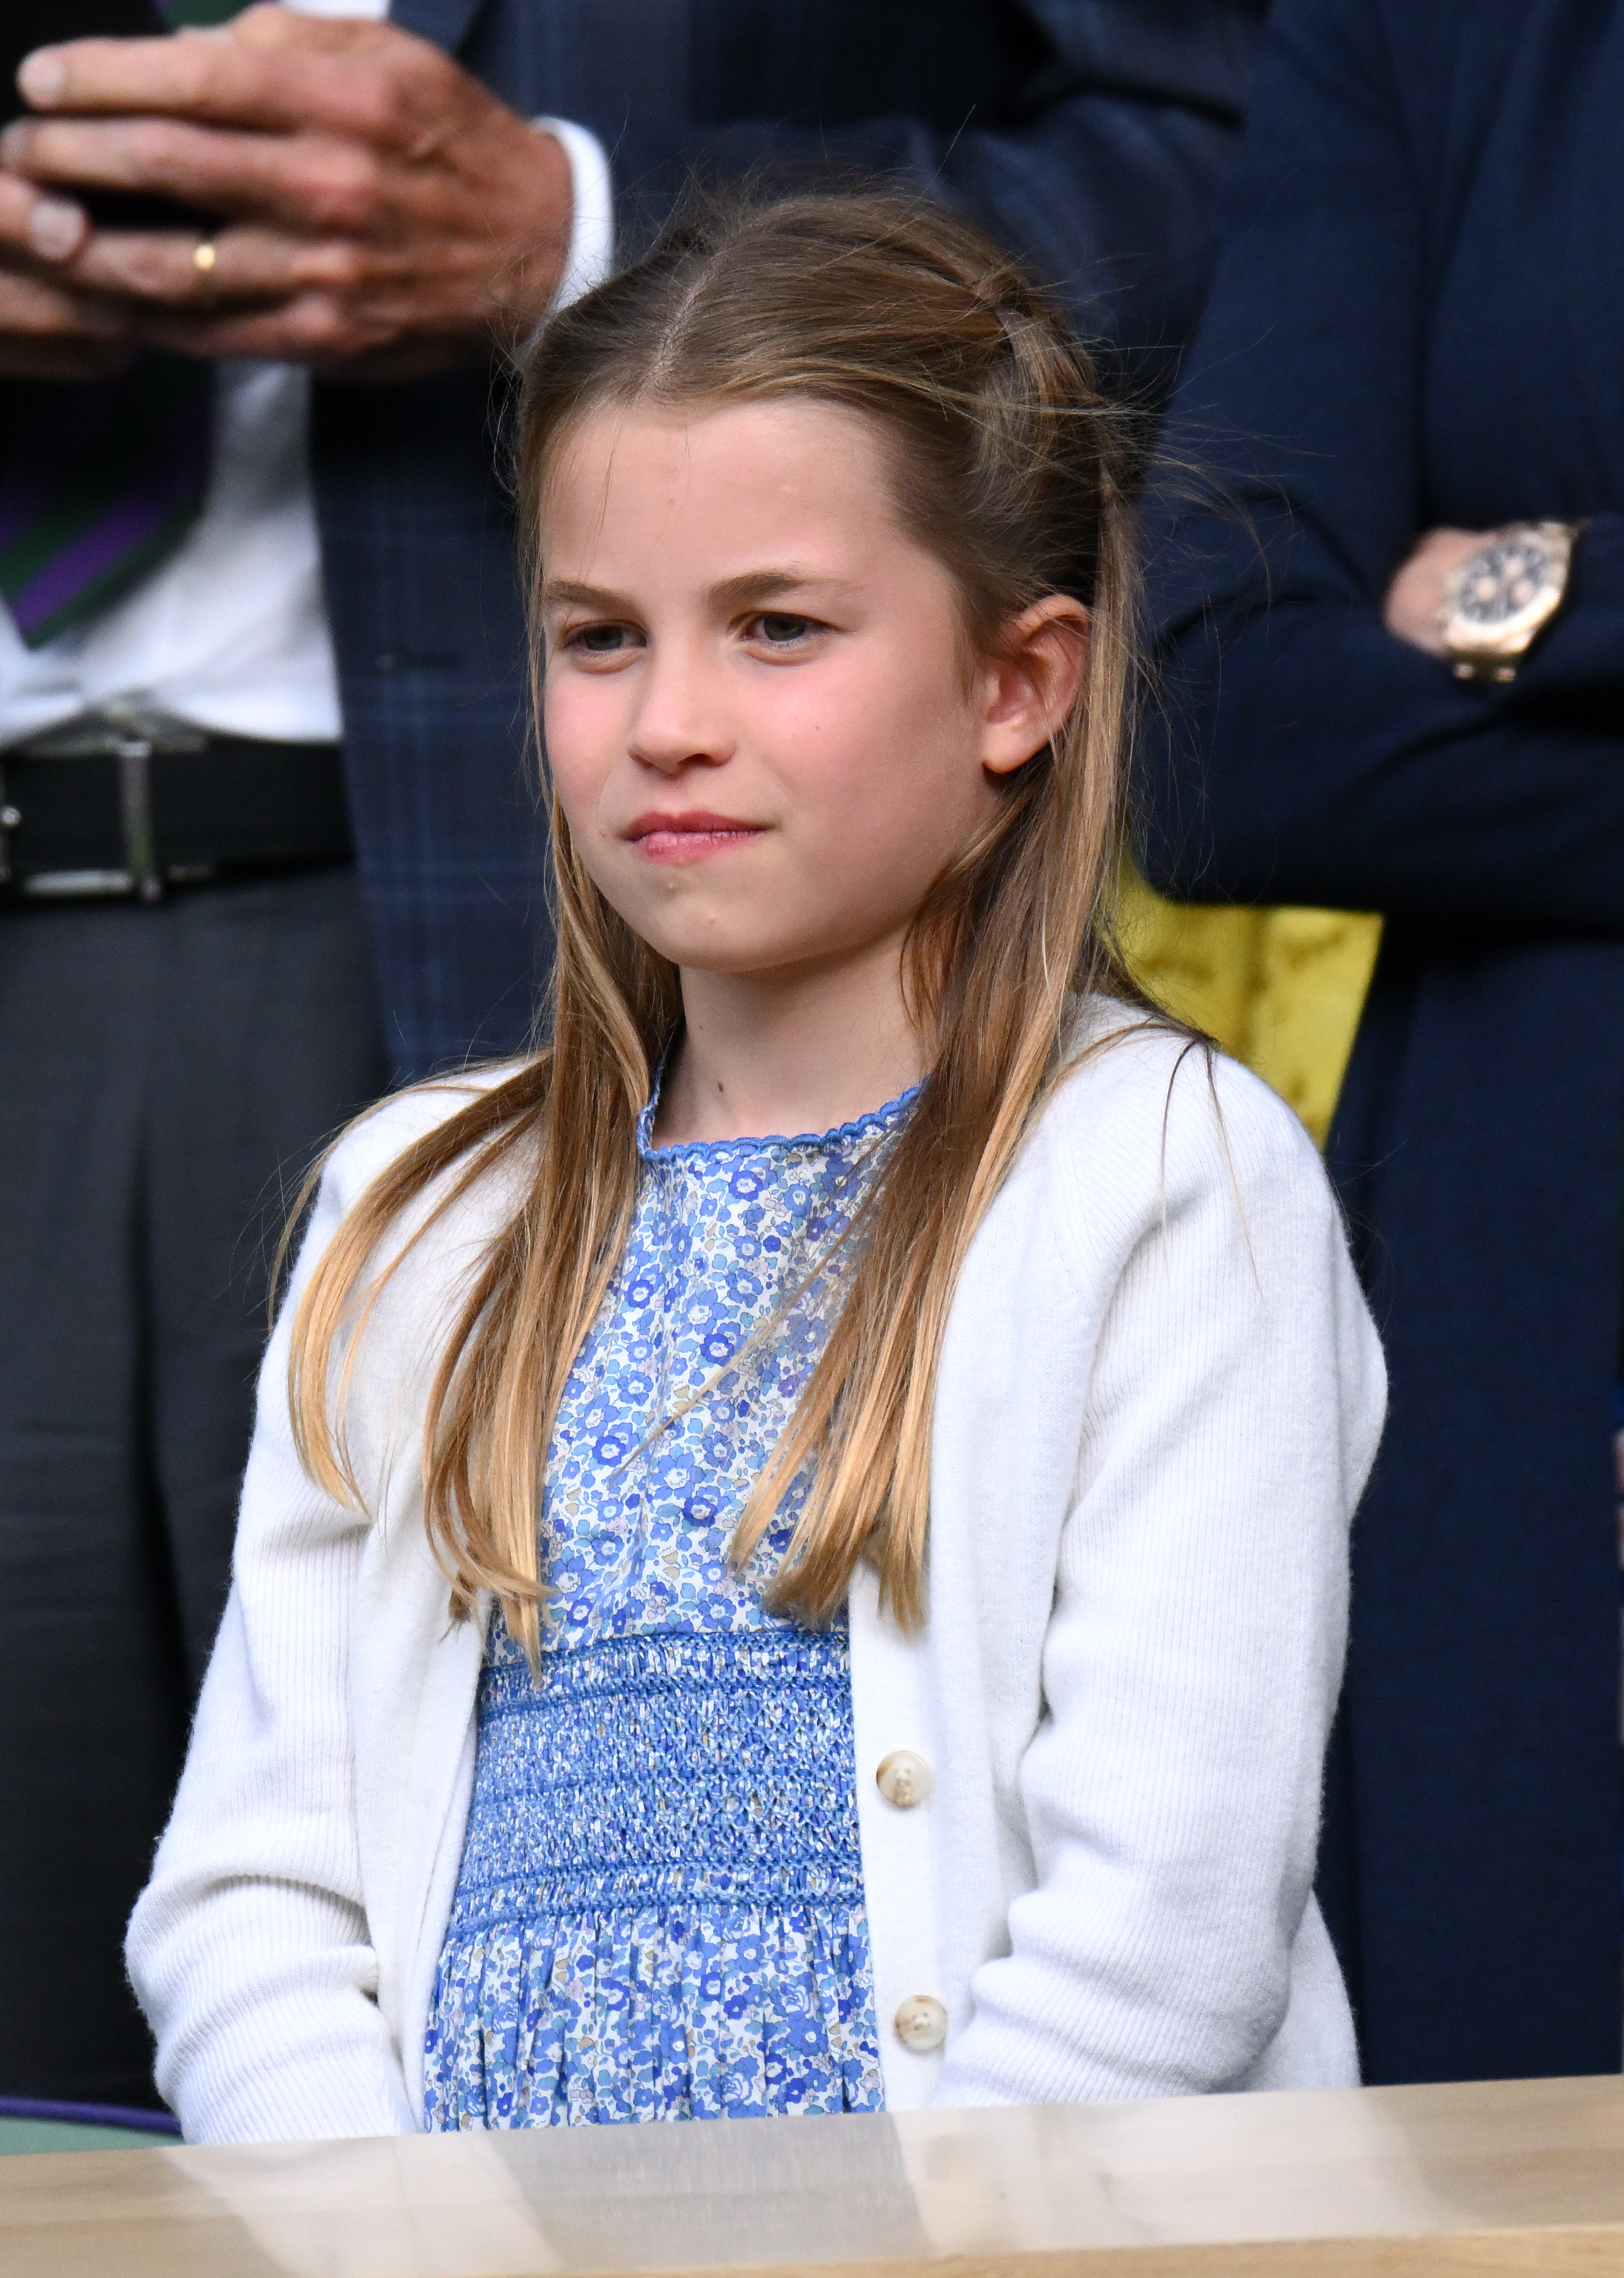 Princess Charlotte at the Wimbledon 2023 men's final in London, England on July 16, 2023 | Source: Getty Images